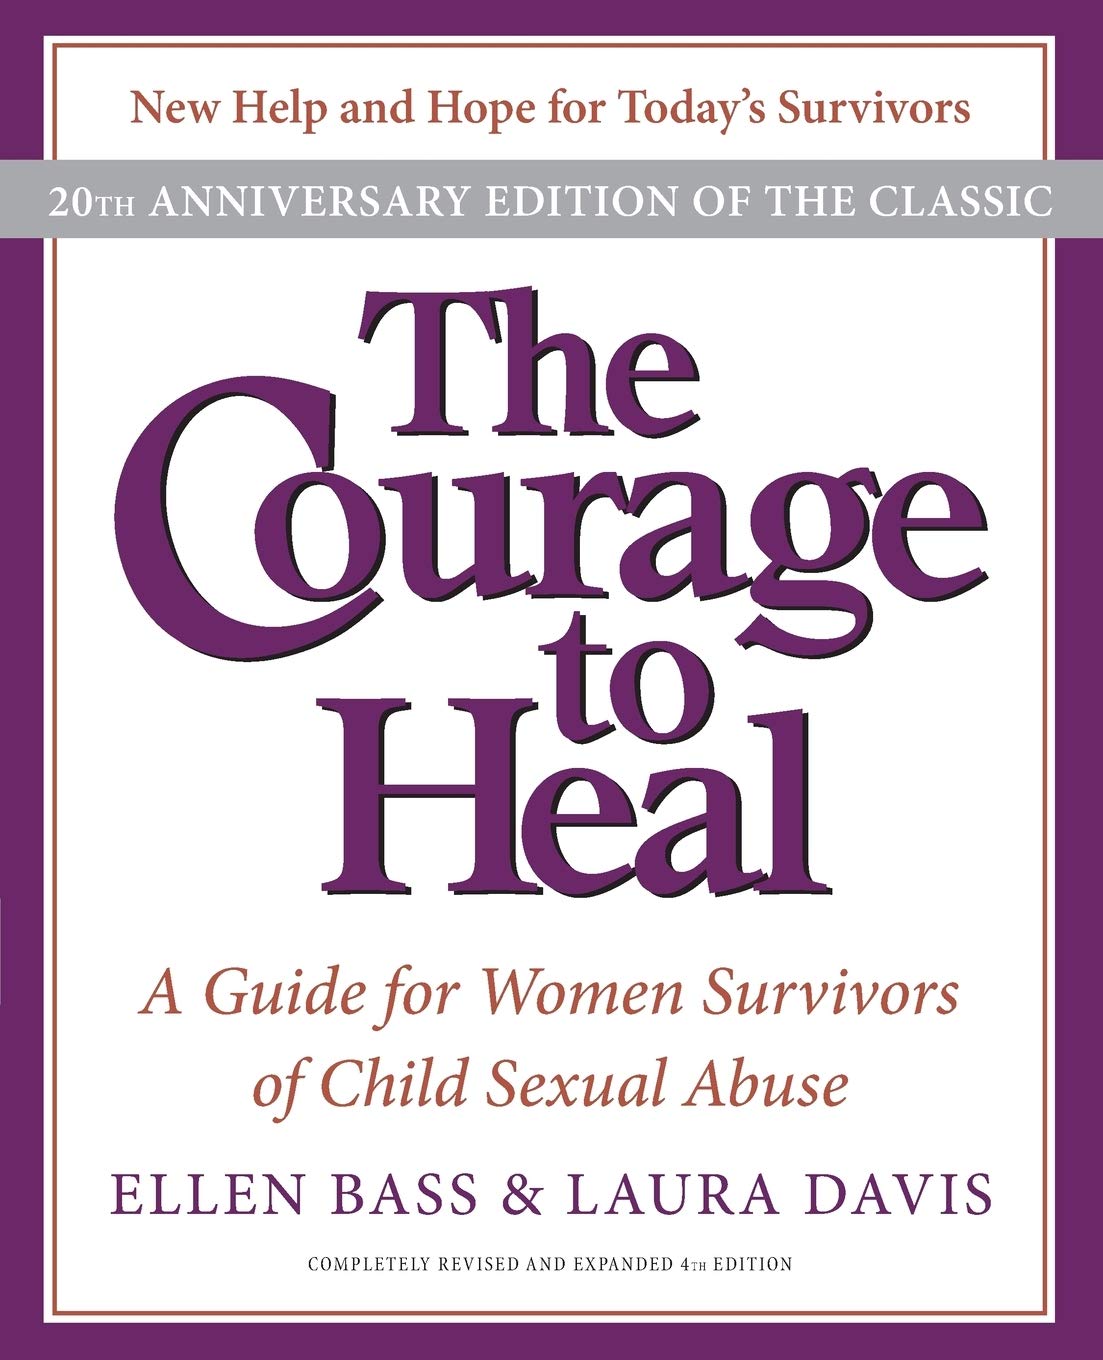 The Courage to Heal Book Recommended By Briana Lefman at Hamsa Healing Space - Book